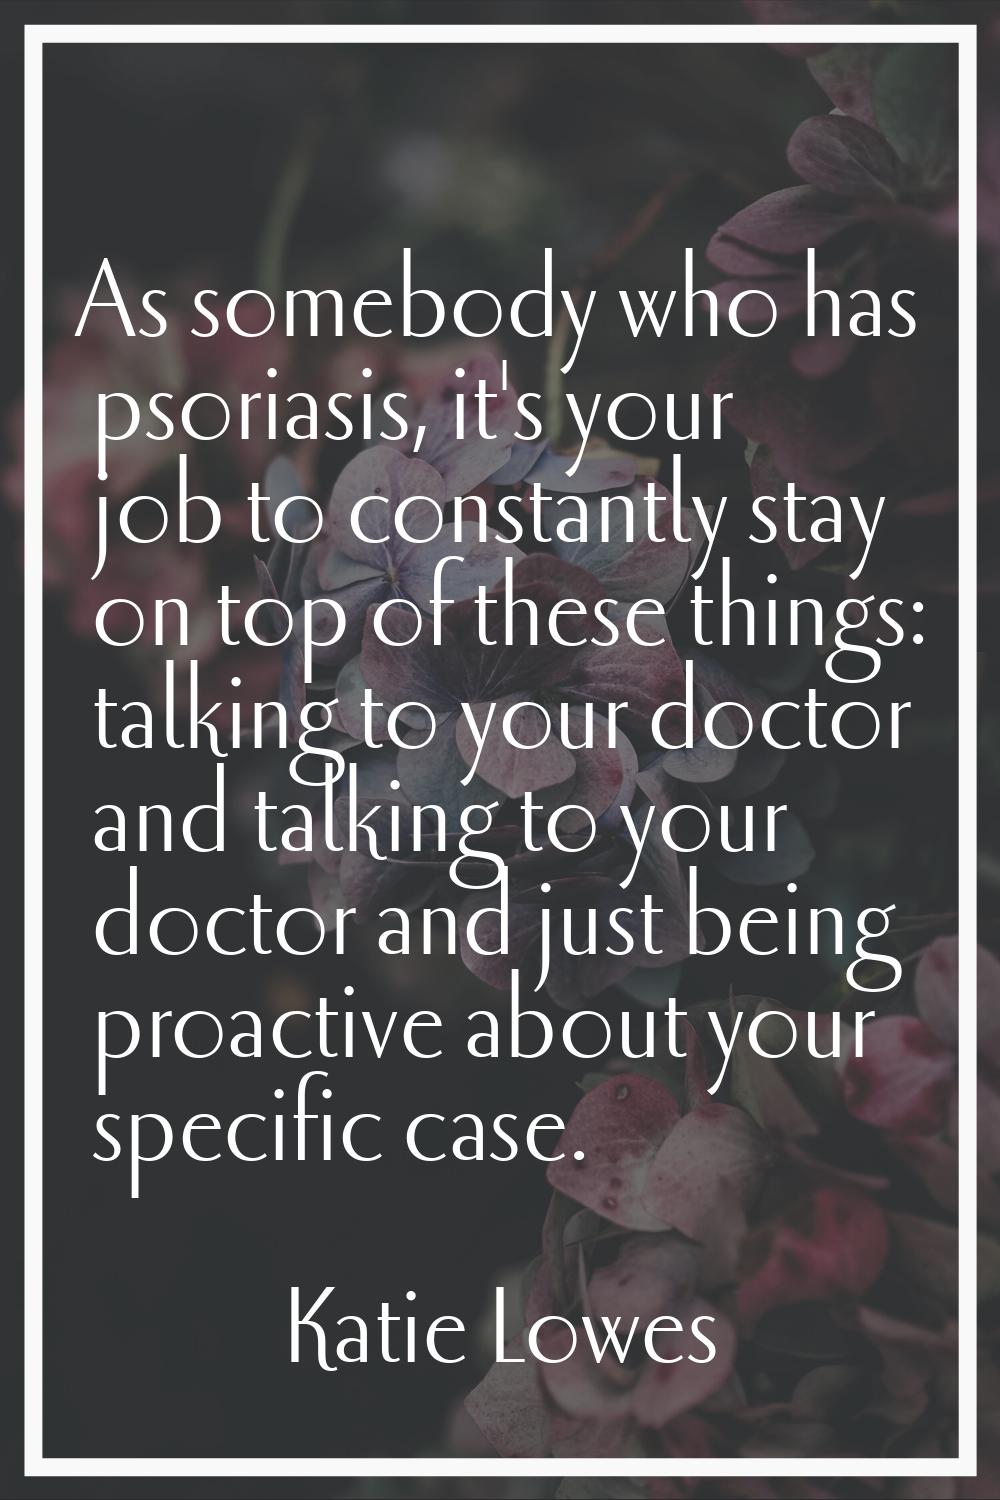 As somebody who has psoriasis, it's your job to constantly stay on top of these things: talking to 